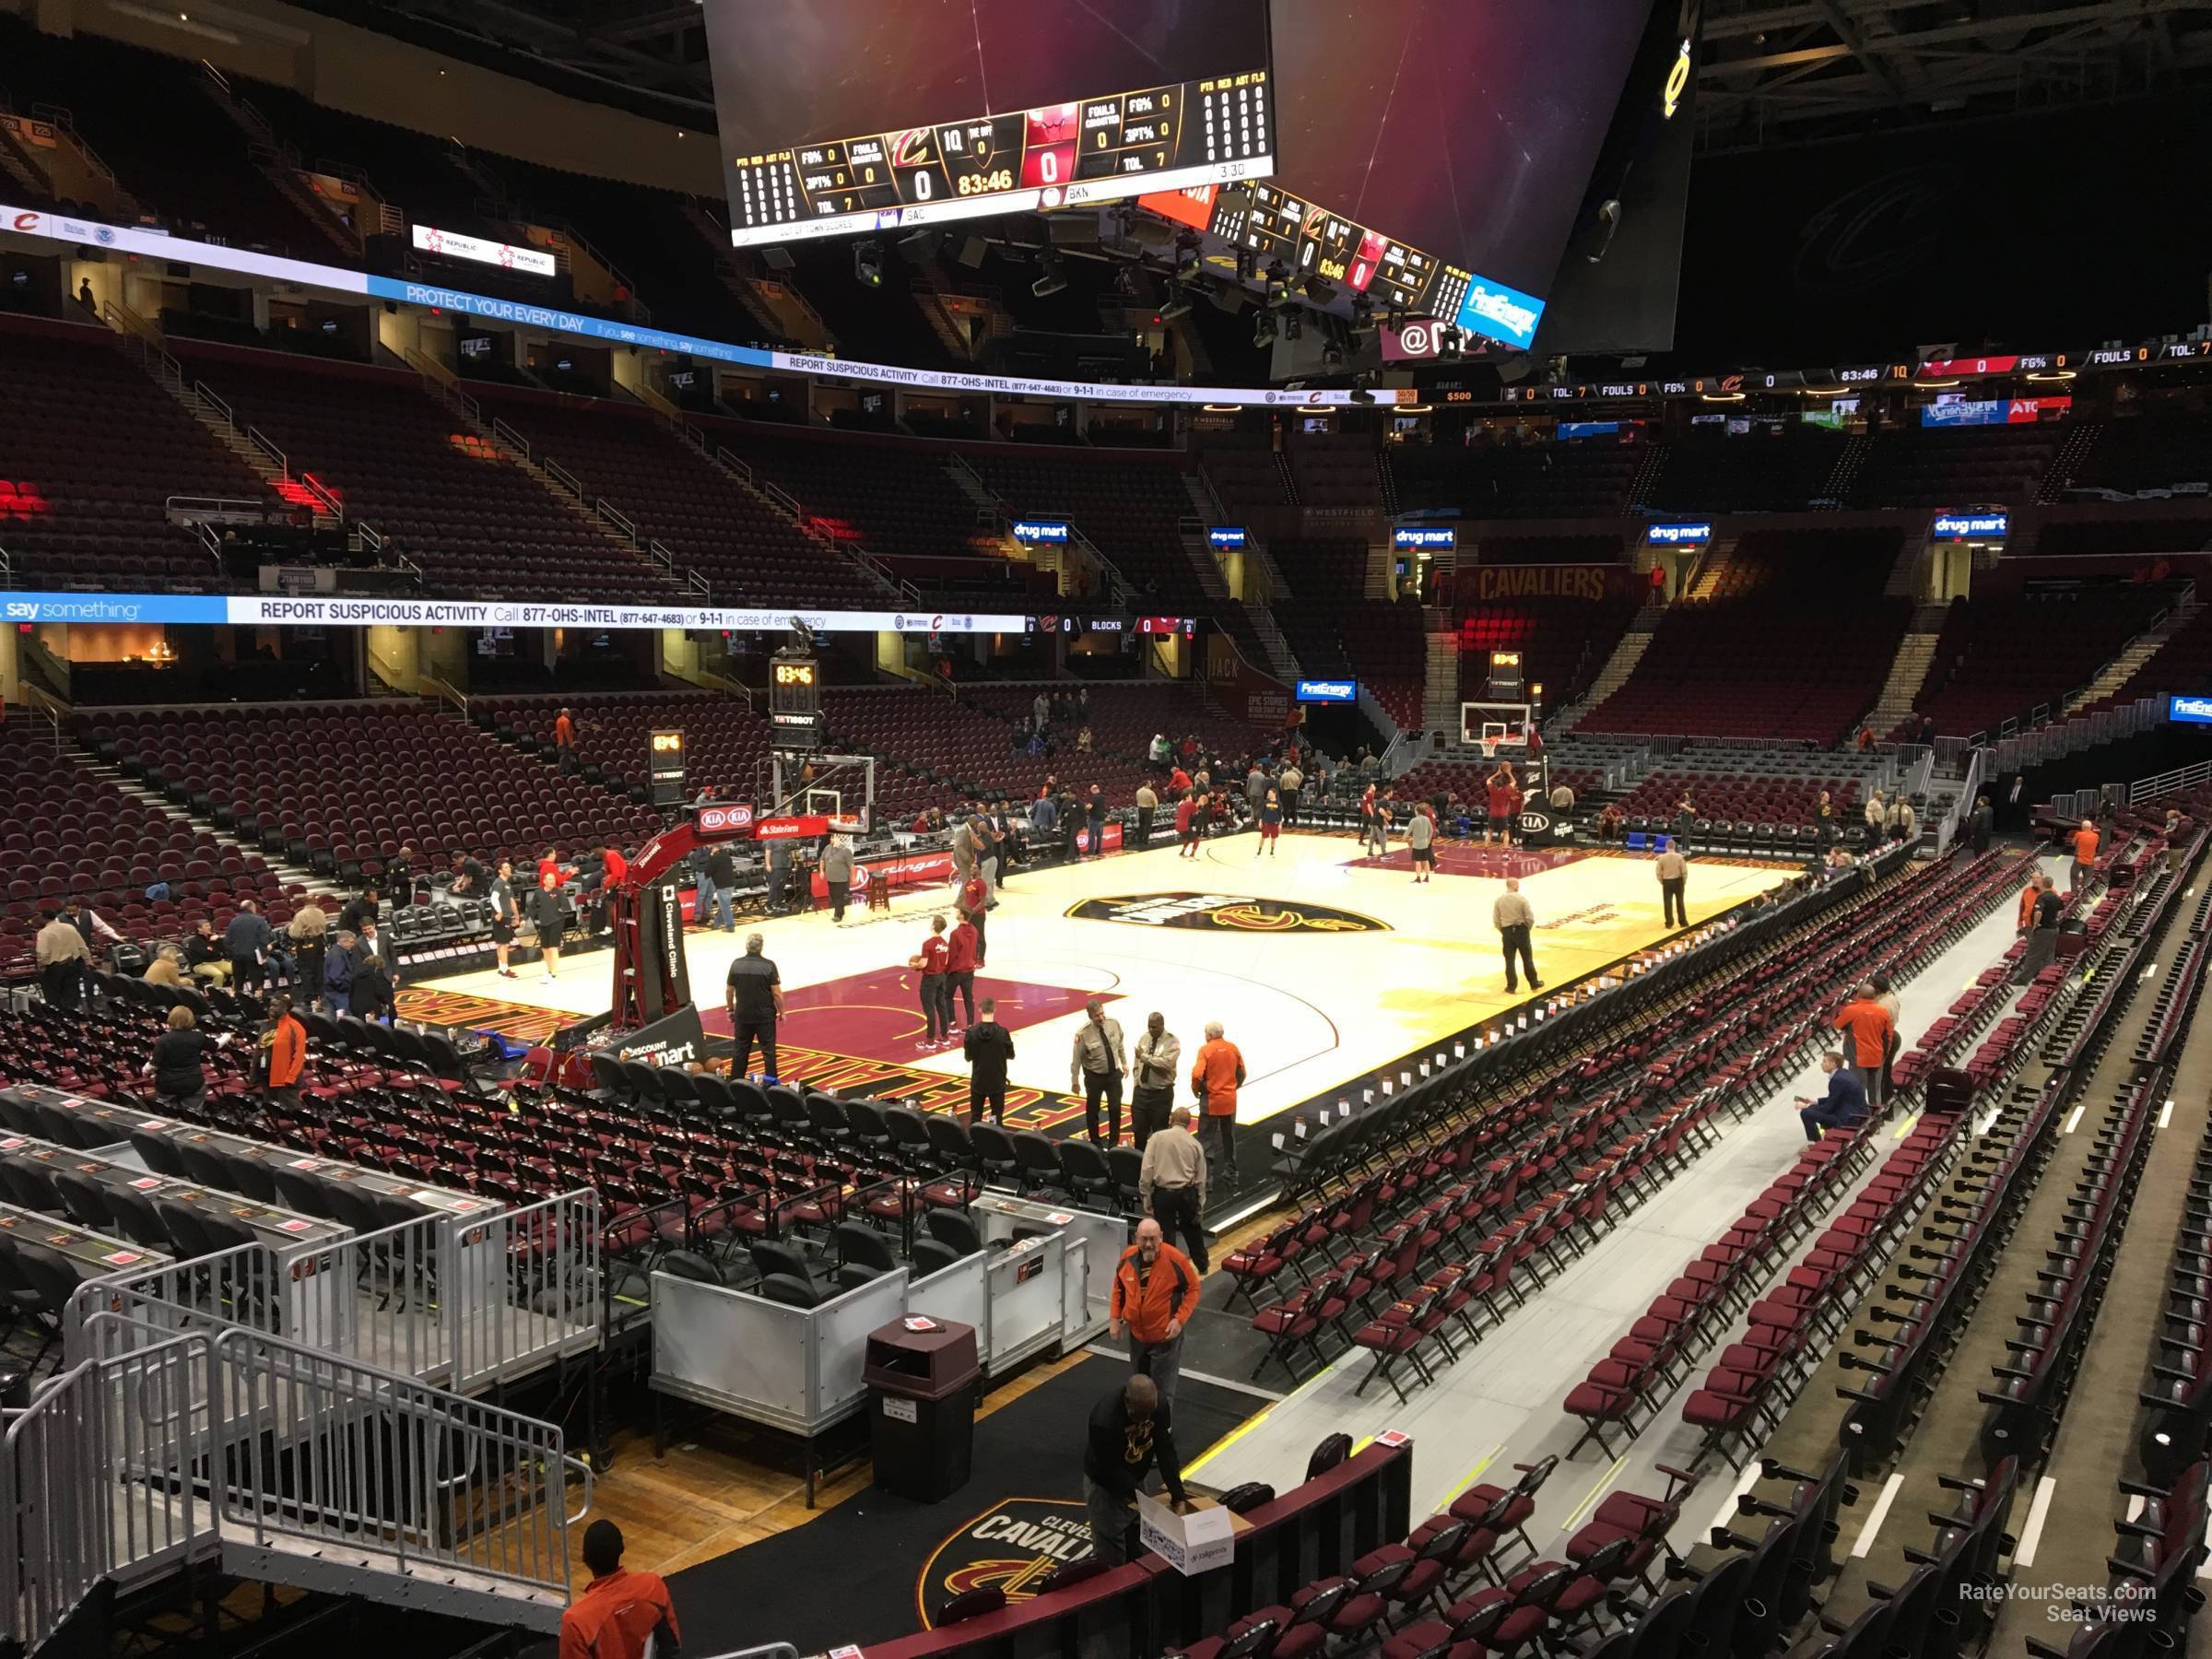 section 124, row 11 seat view  for basketball - rocket mortgage fieldhouse